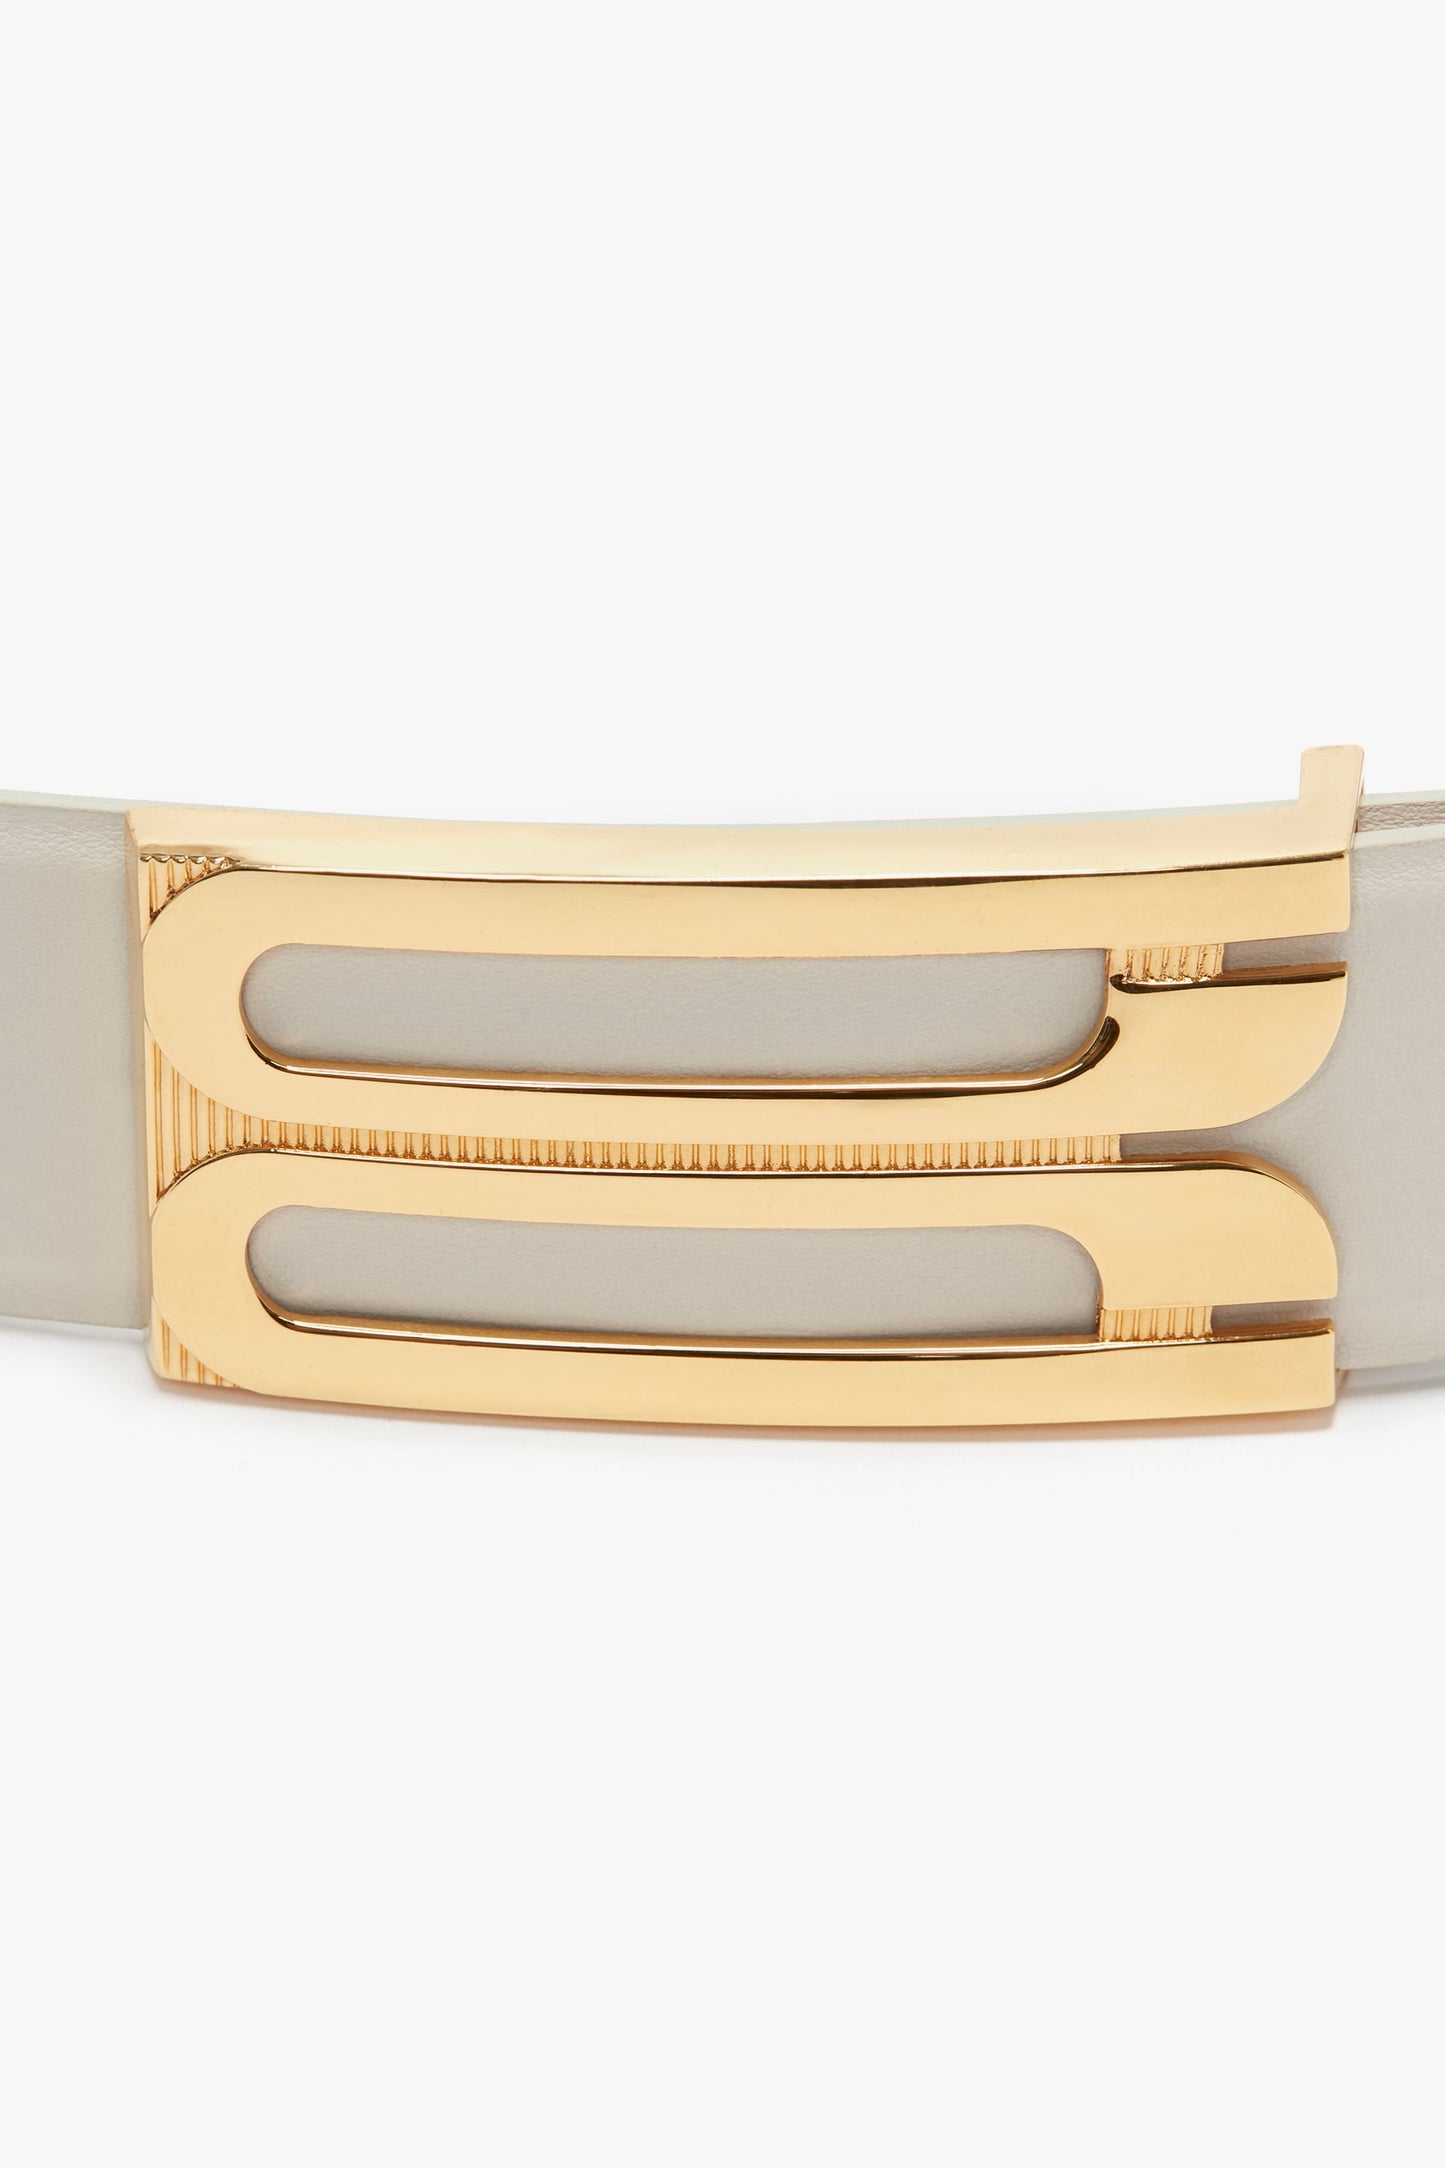 Close-up of a Victoria Beckham Jumbo Frame Belt In Latte Leather with gold hardware, featuring a geometric design on the buckle.